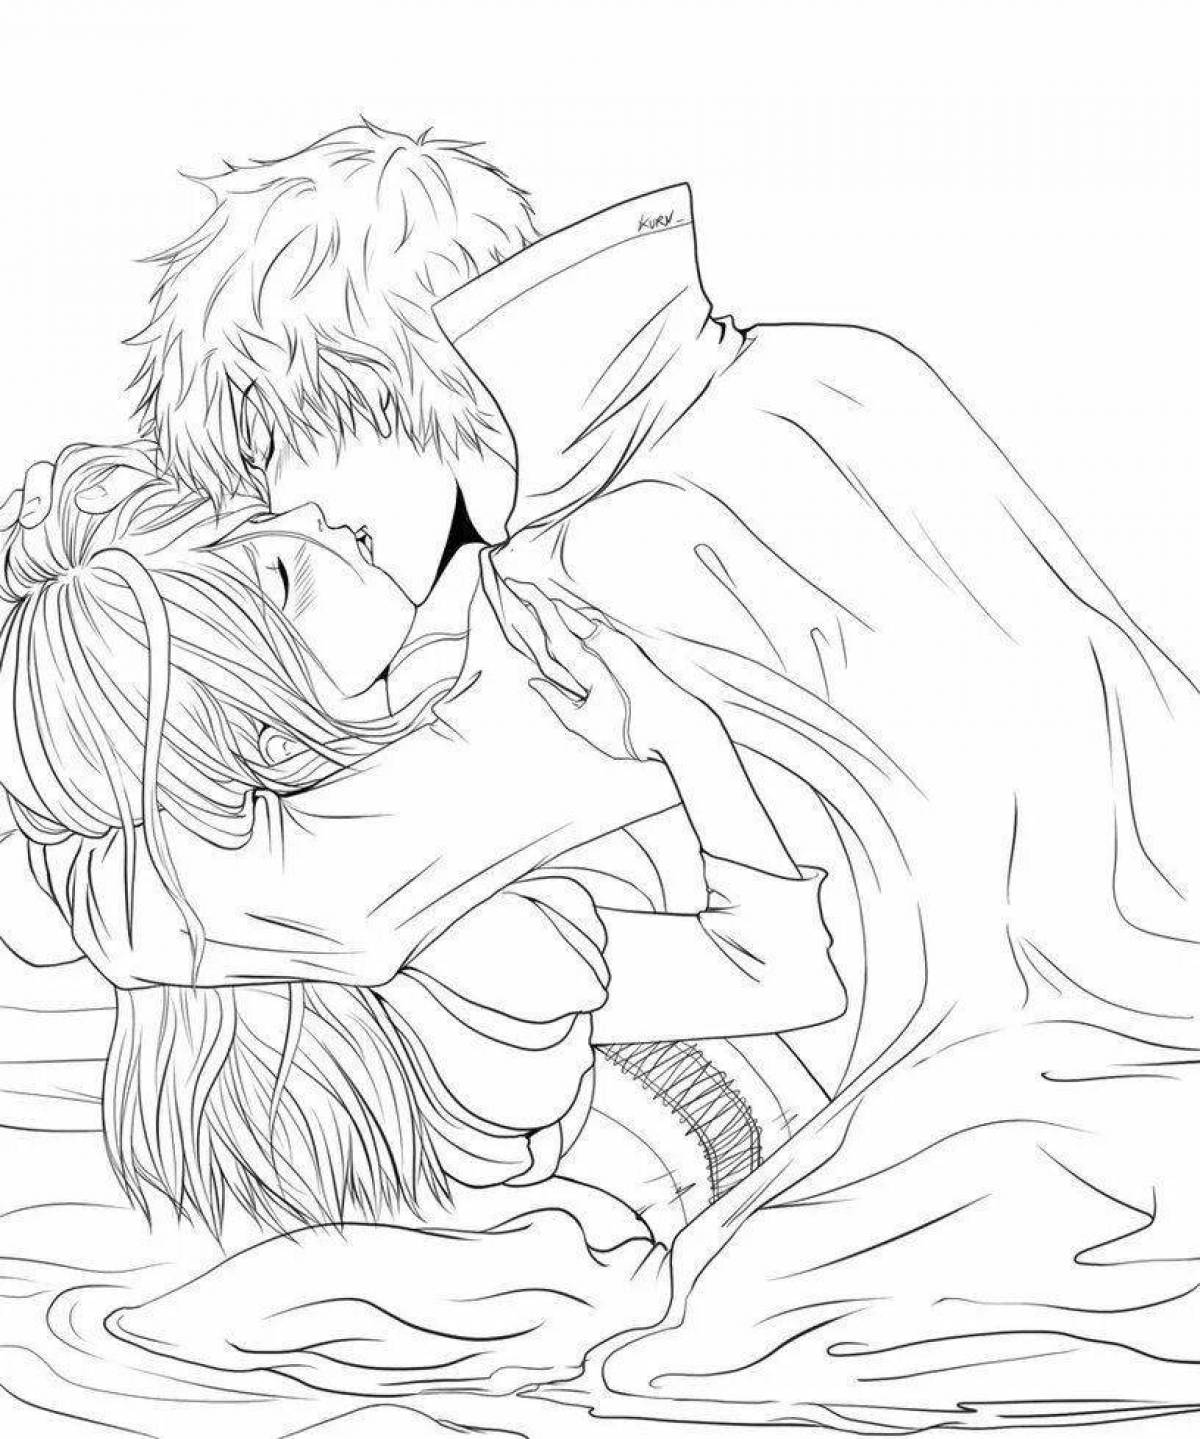 Lovely anime kiss coloring page